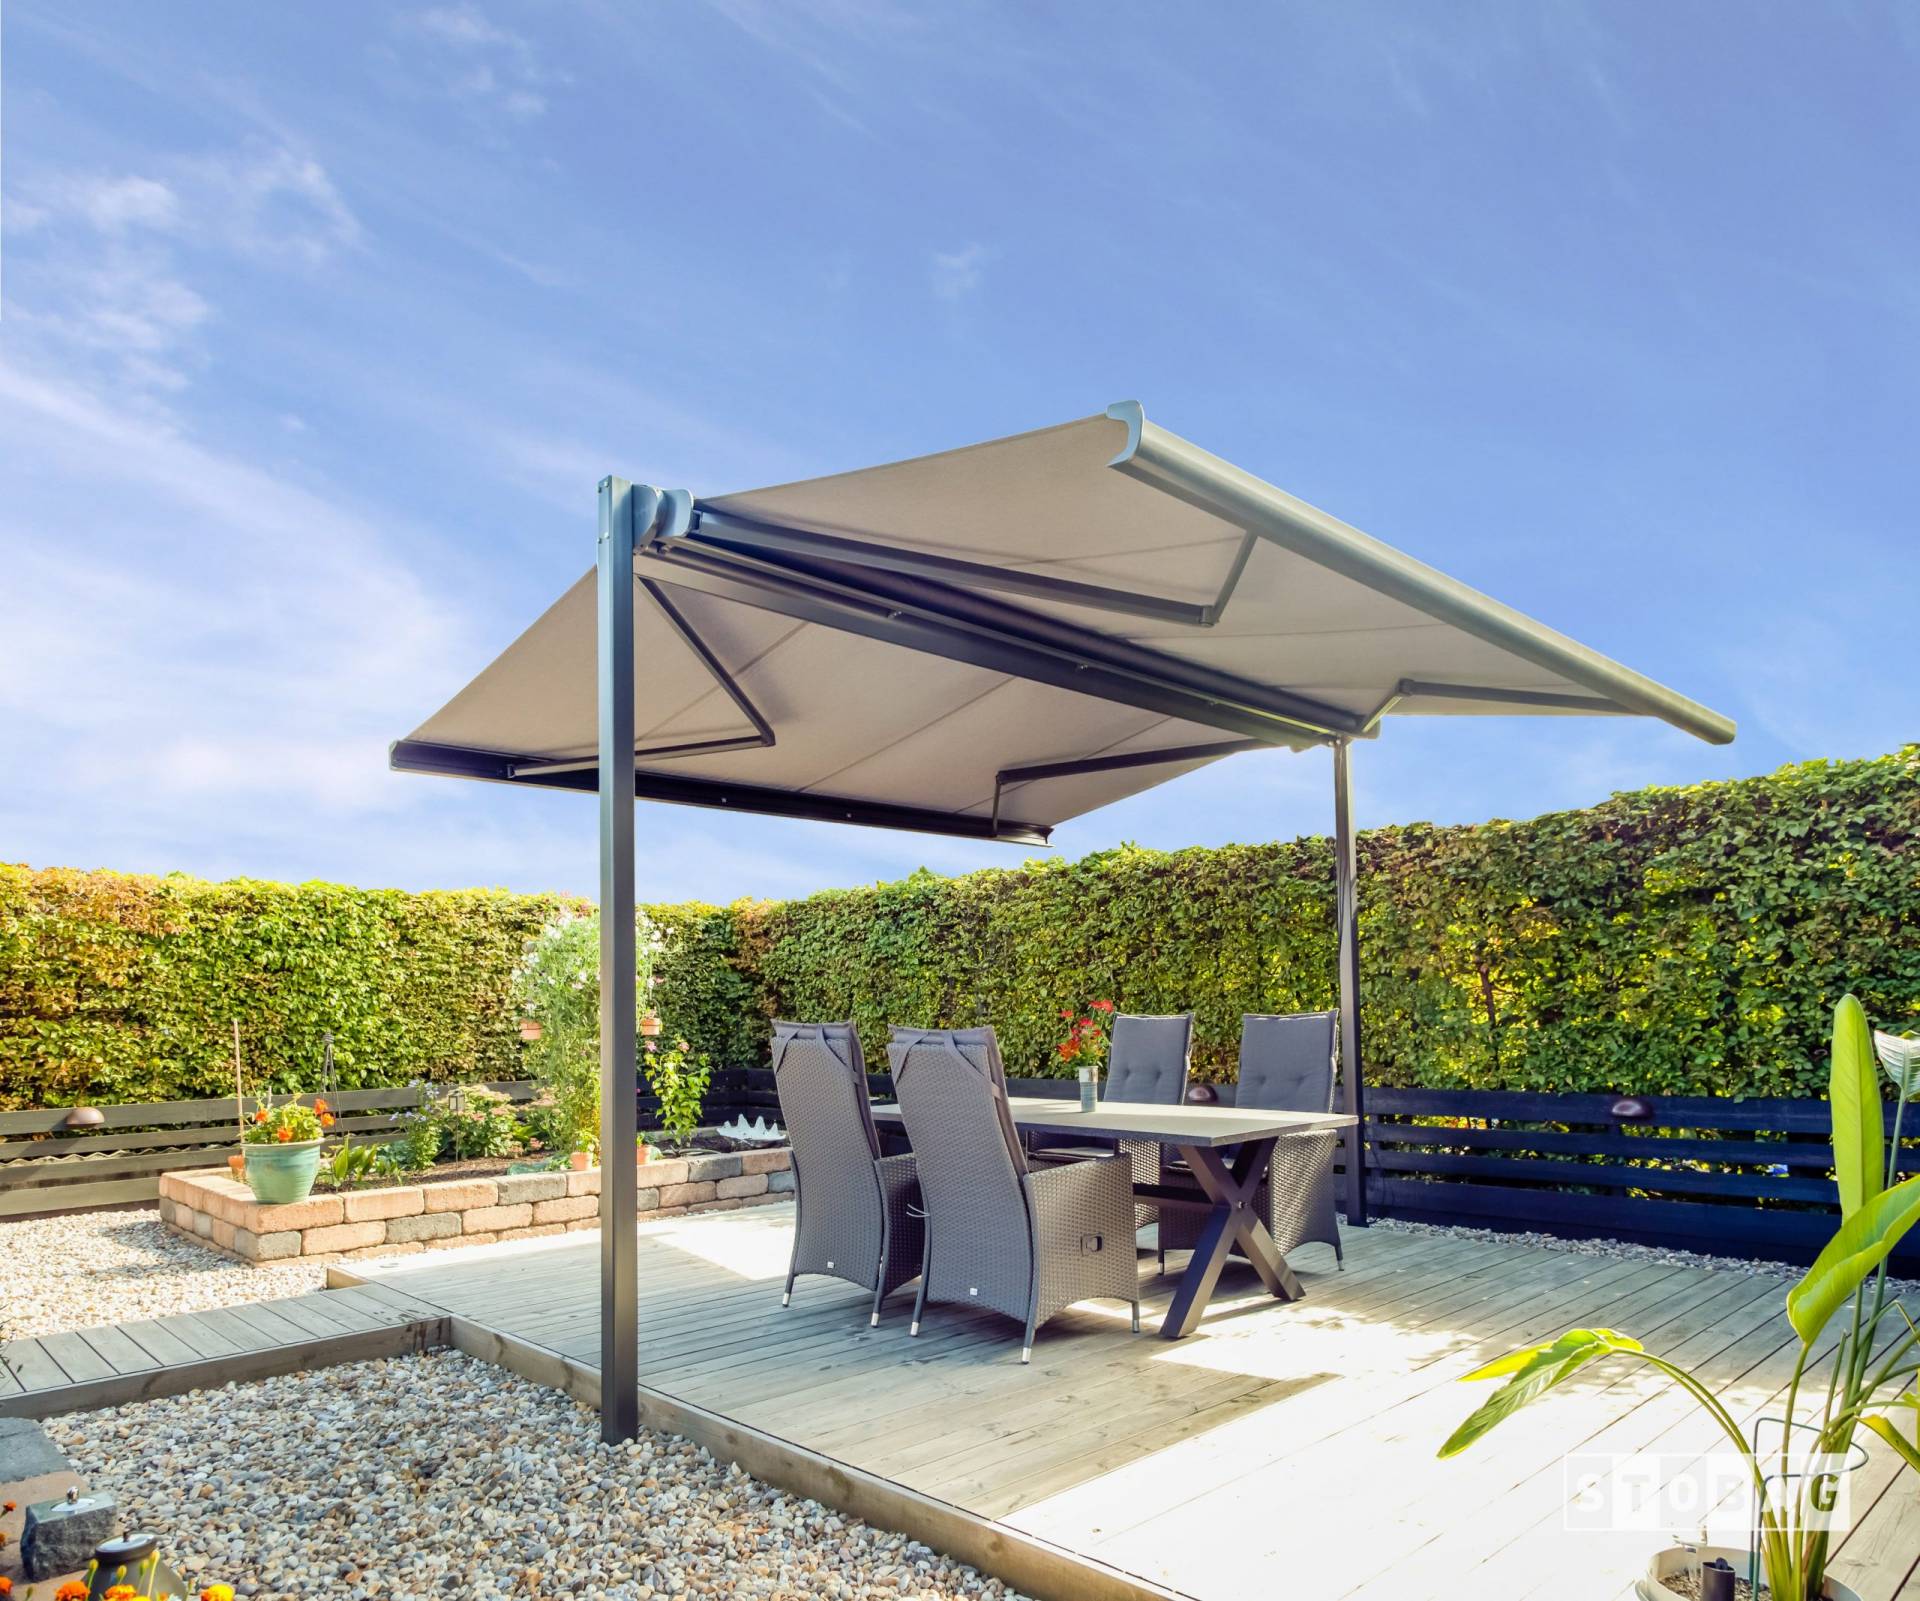 Stand alone retractable motorized dual awning